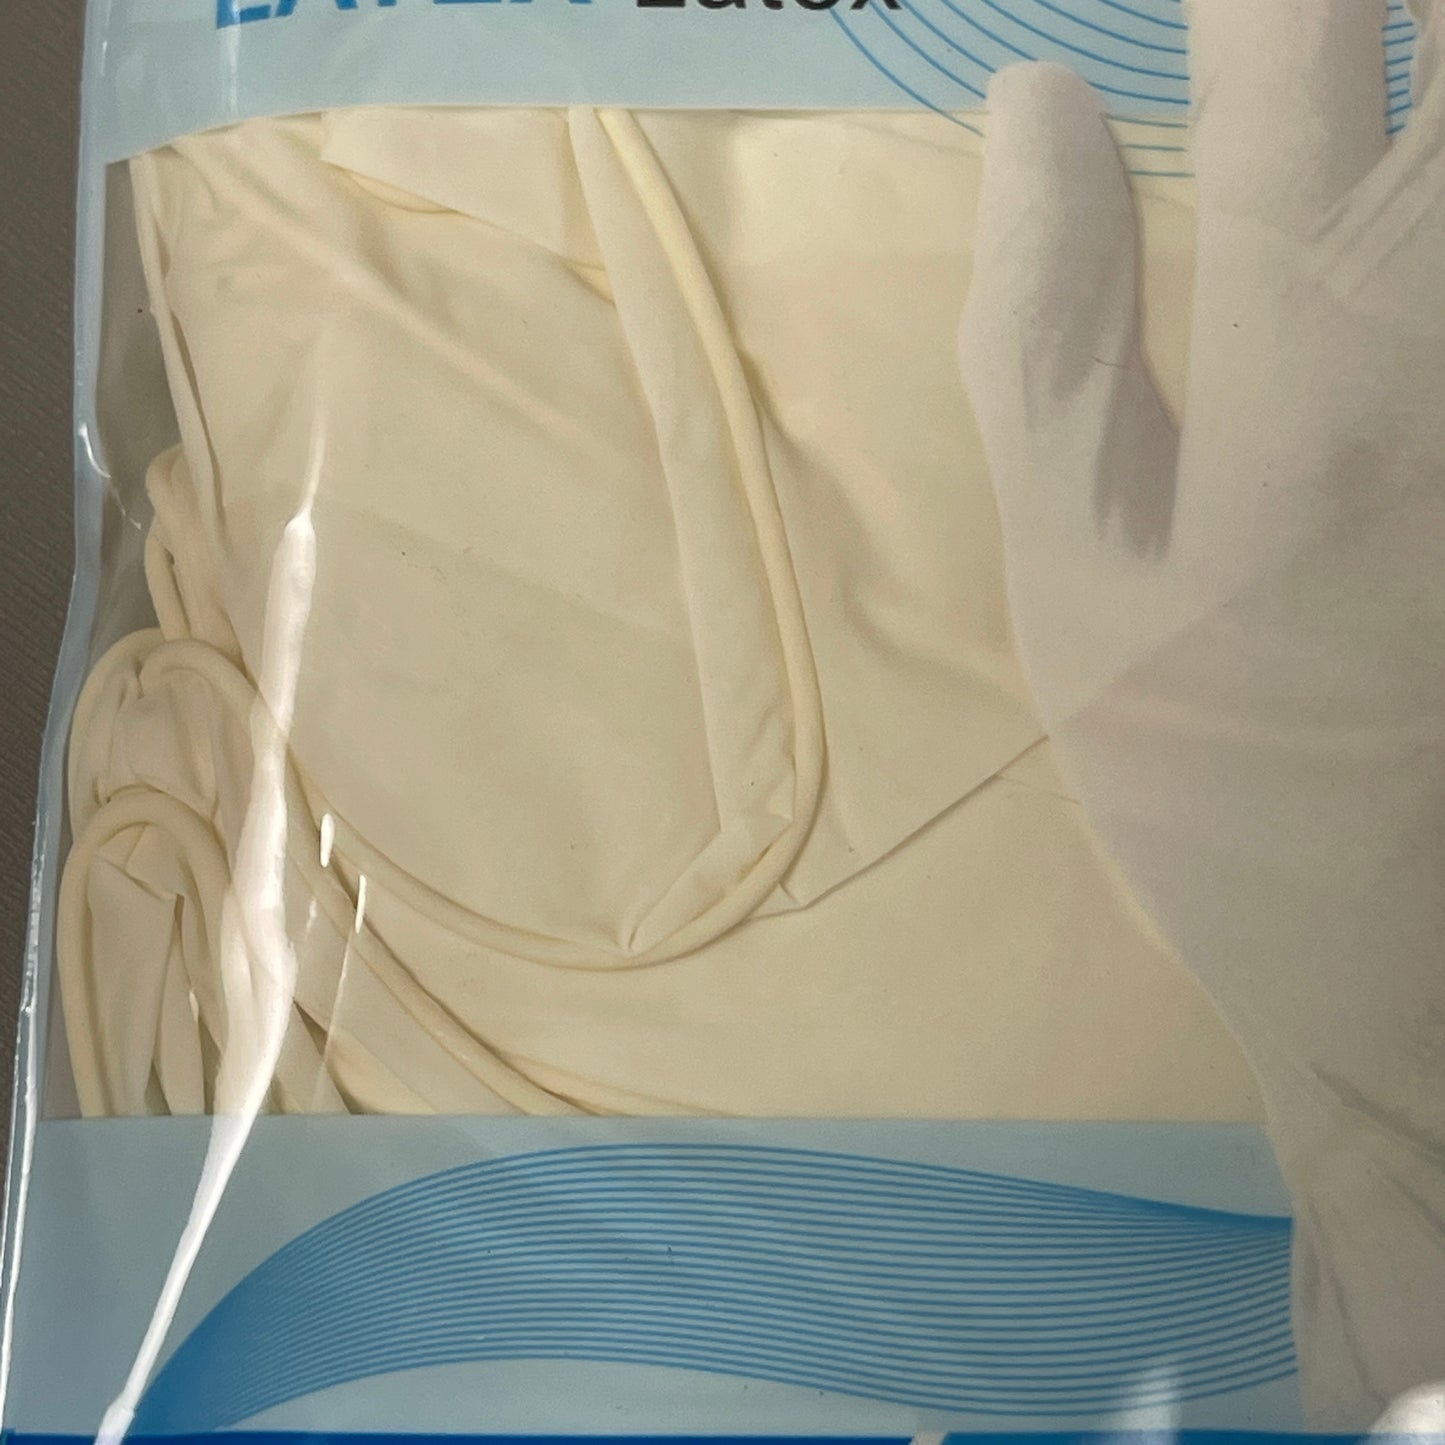 STANDARD GLOVE COMPANY 10 Pack Of Disposable Latex Gloves Sz L - L10PK36 (New)